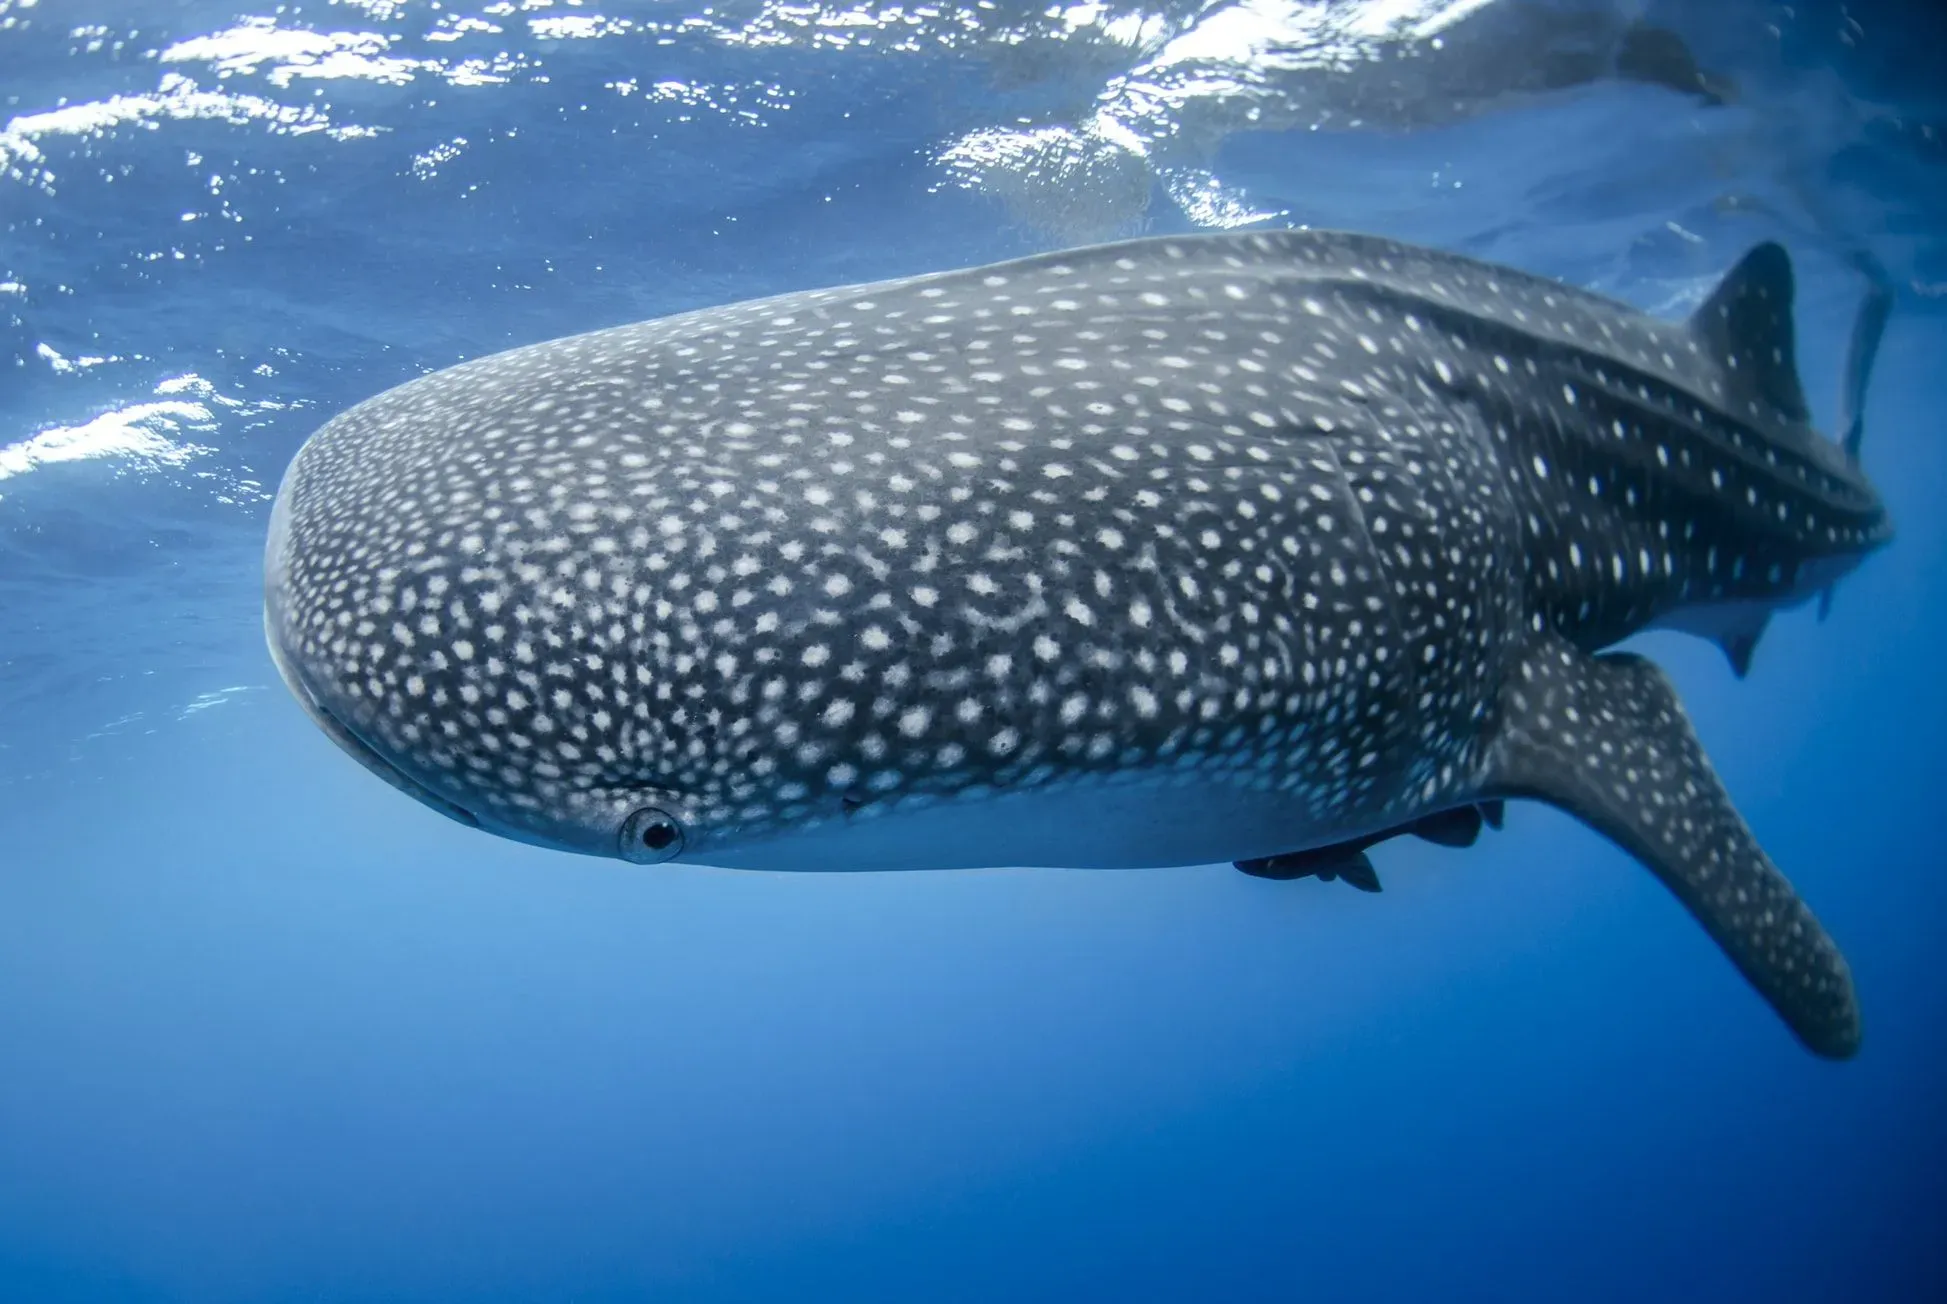 Whale sharks have unique stripes and spots all over their skin.